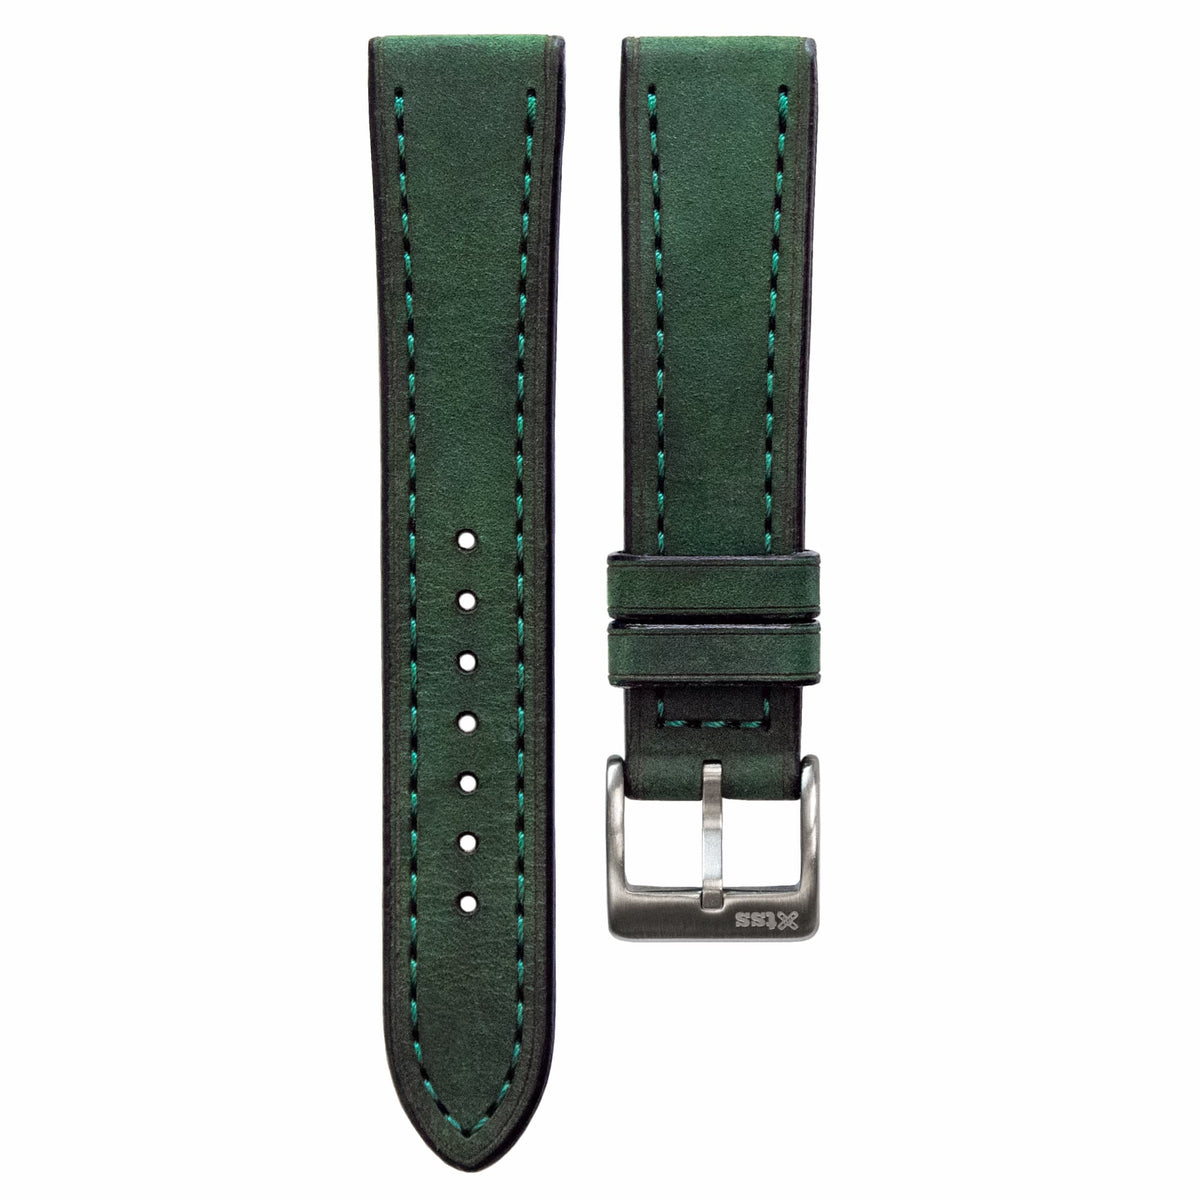 Full-Stitch Forest Green Leather Watch Strap